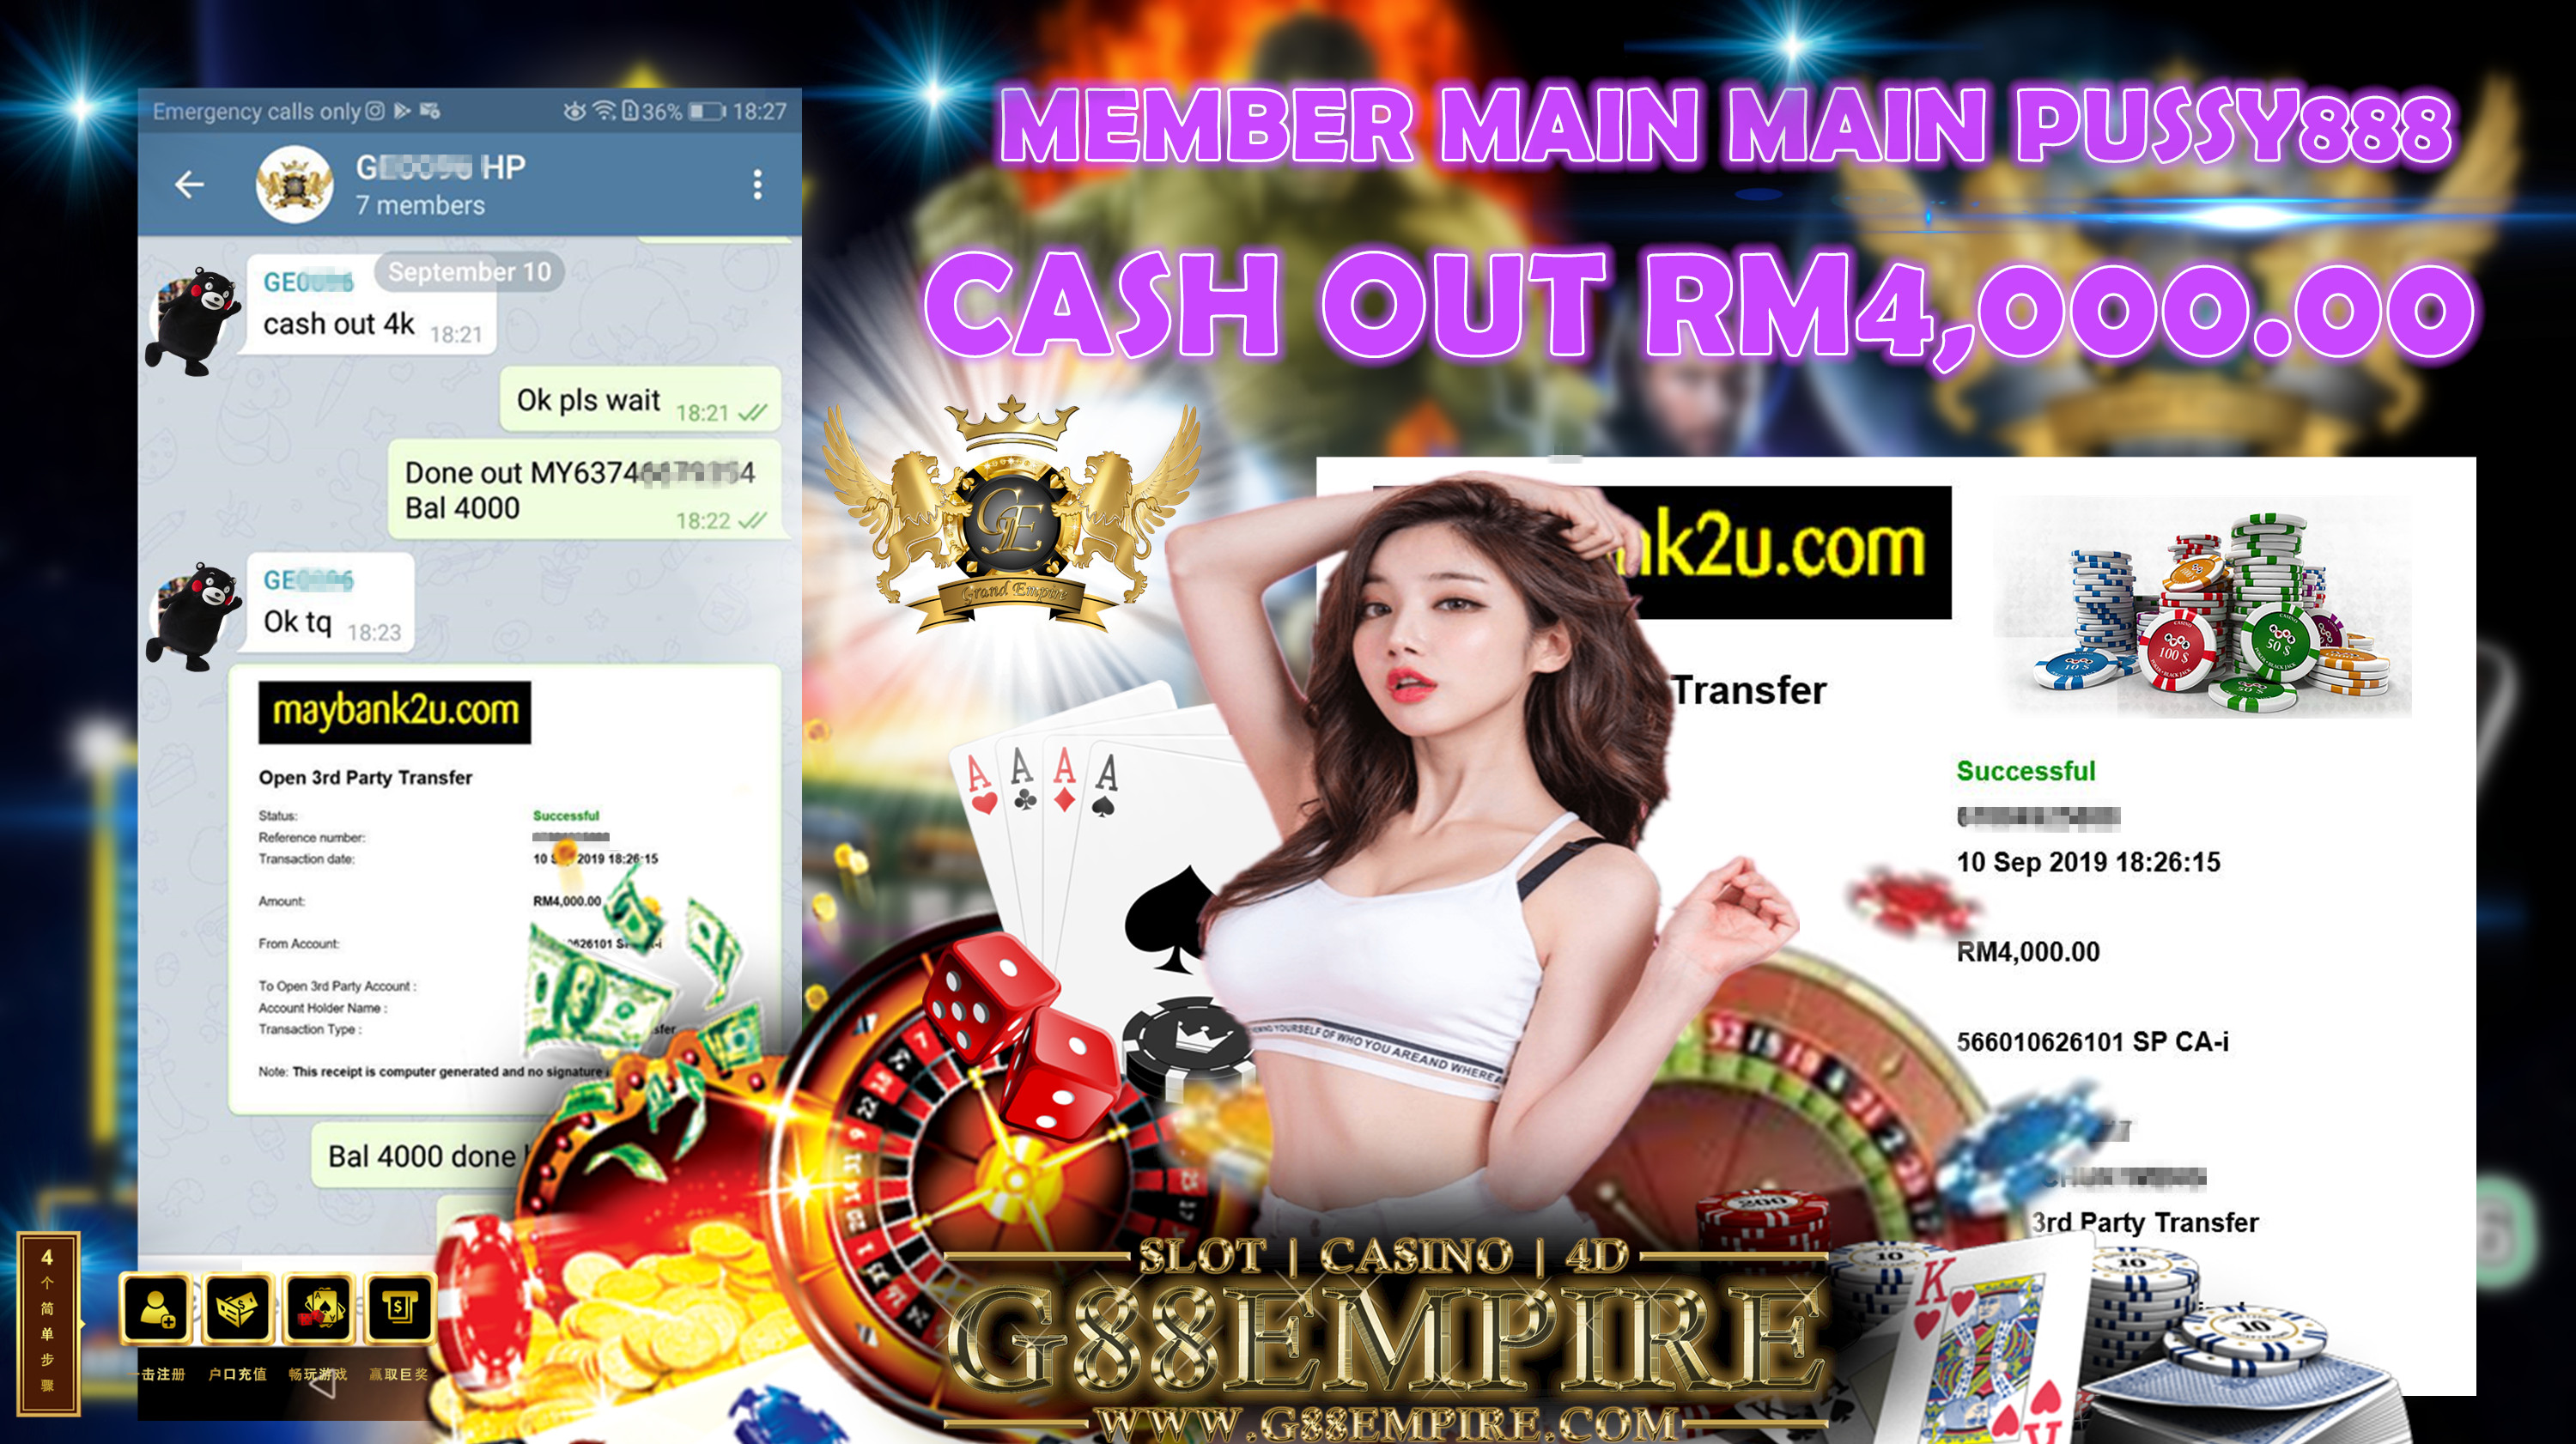 PUSSY888 CASH OUT RM4000!!!